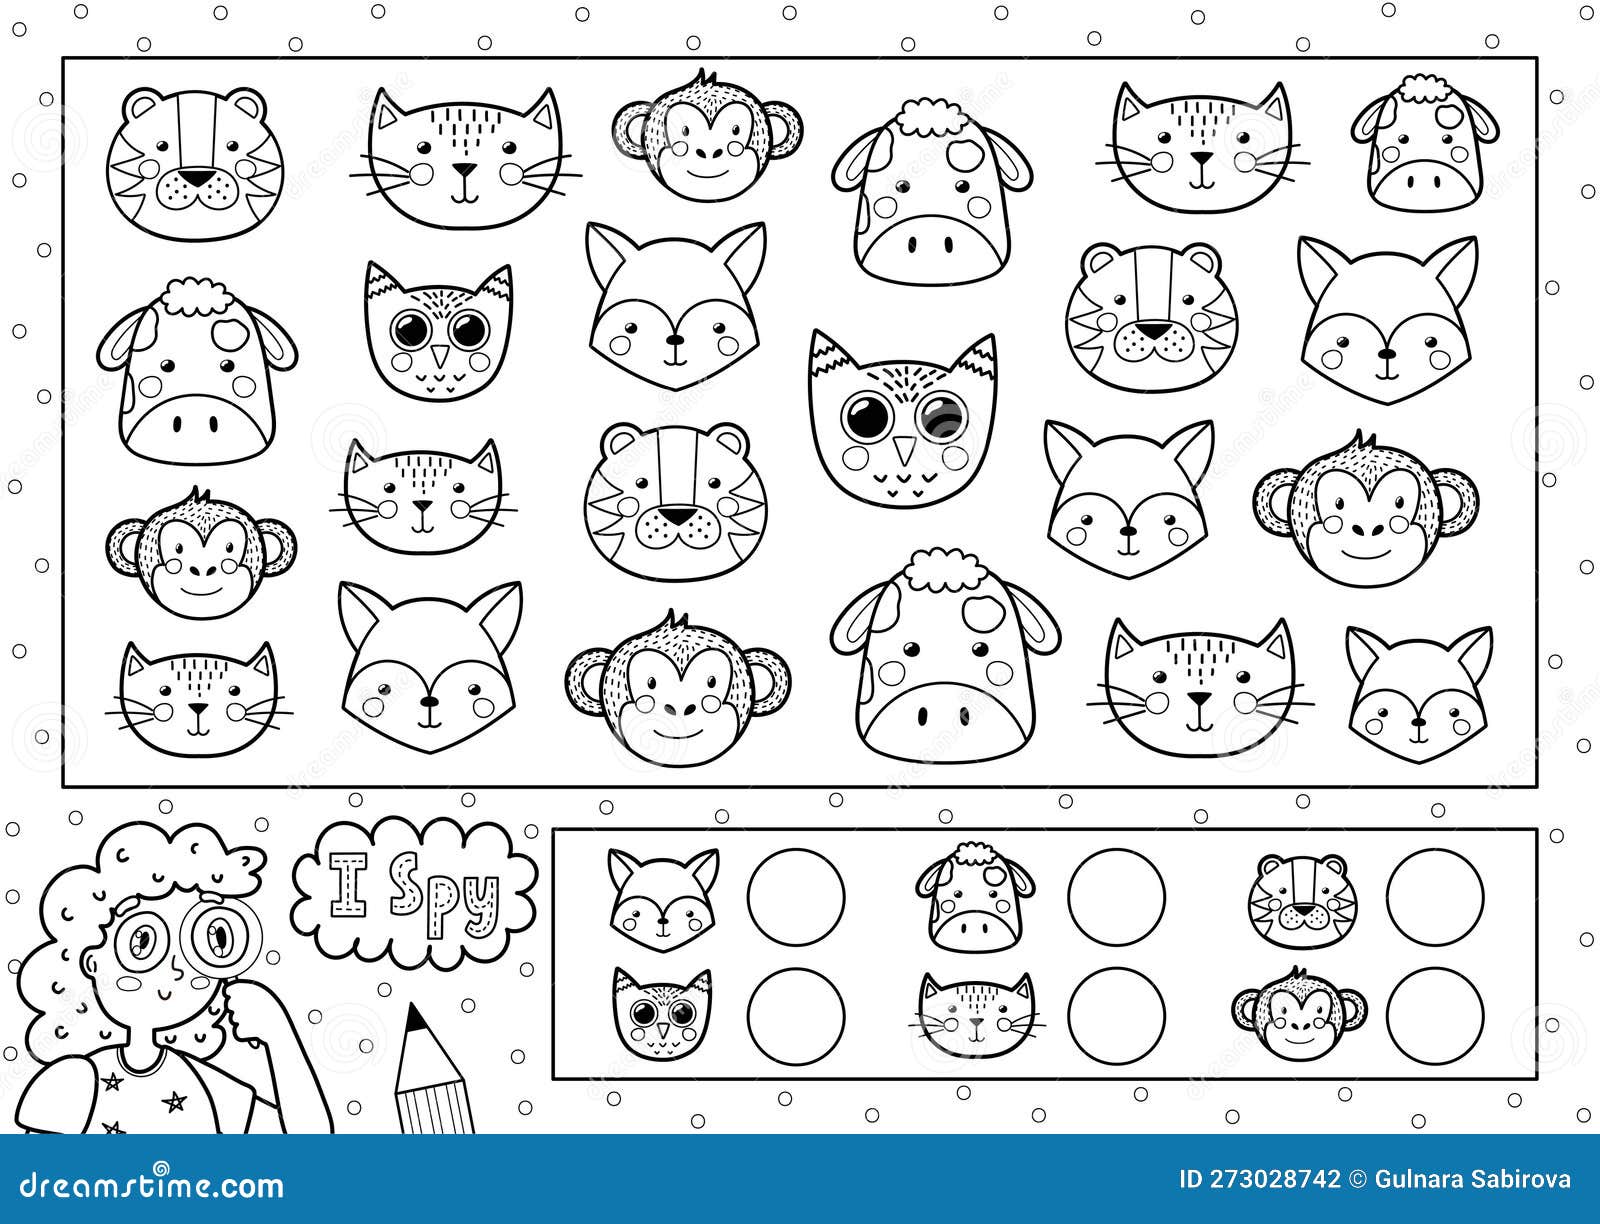 I spy game coloring page for kids find and count cute animals stock vector